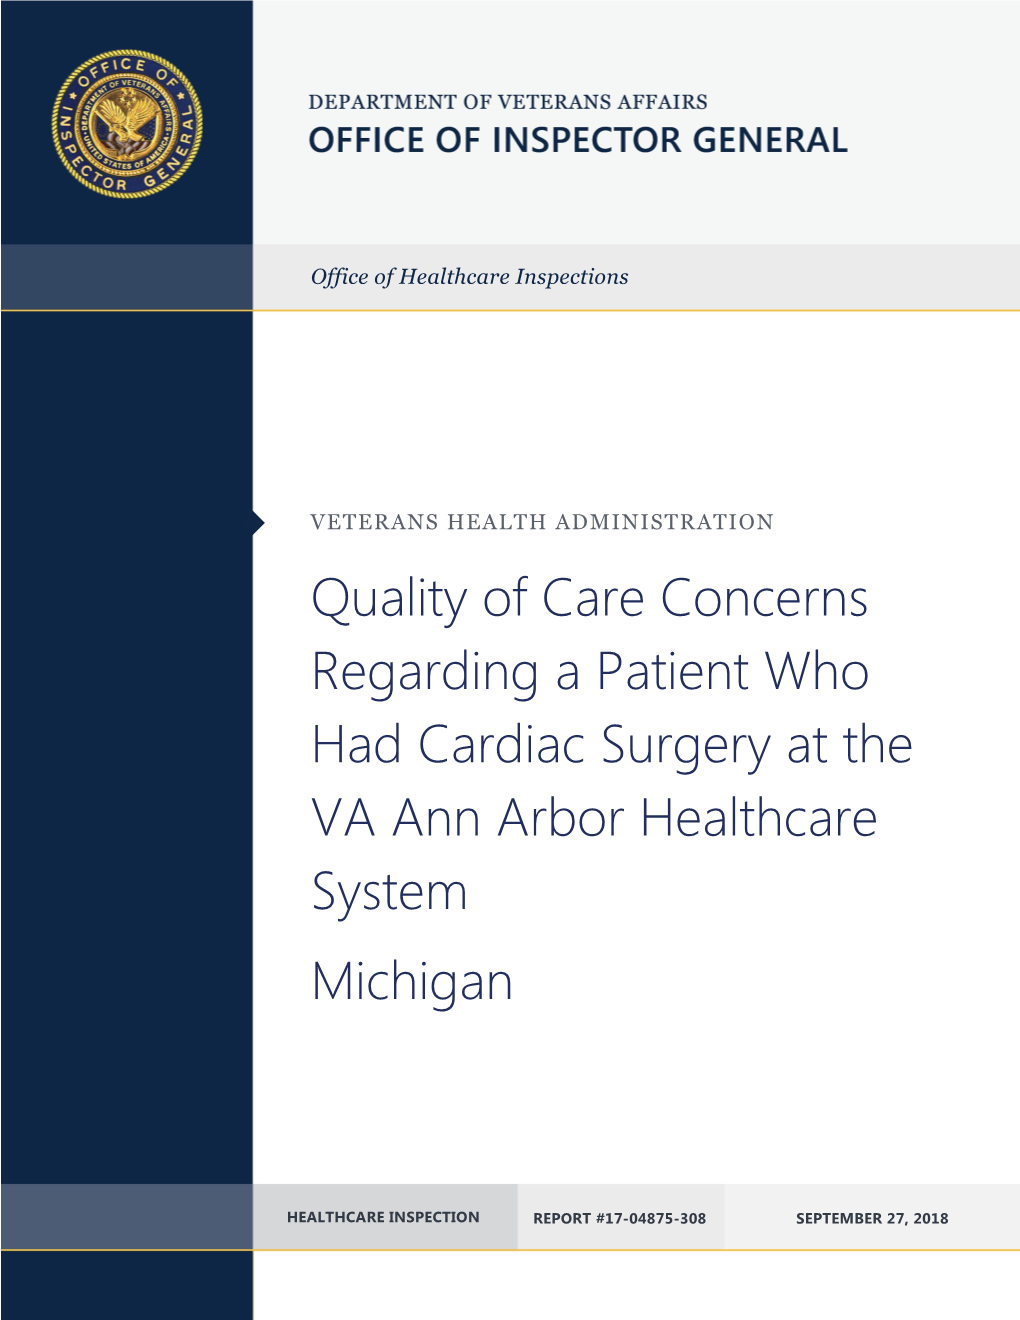 Quality of Care Concerns Regarding a Patient Who Had Cardiac Surgery at the VA Ann Arbor Healthcare System Michigan